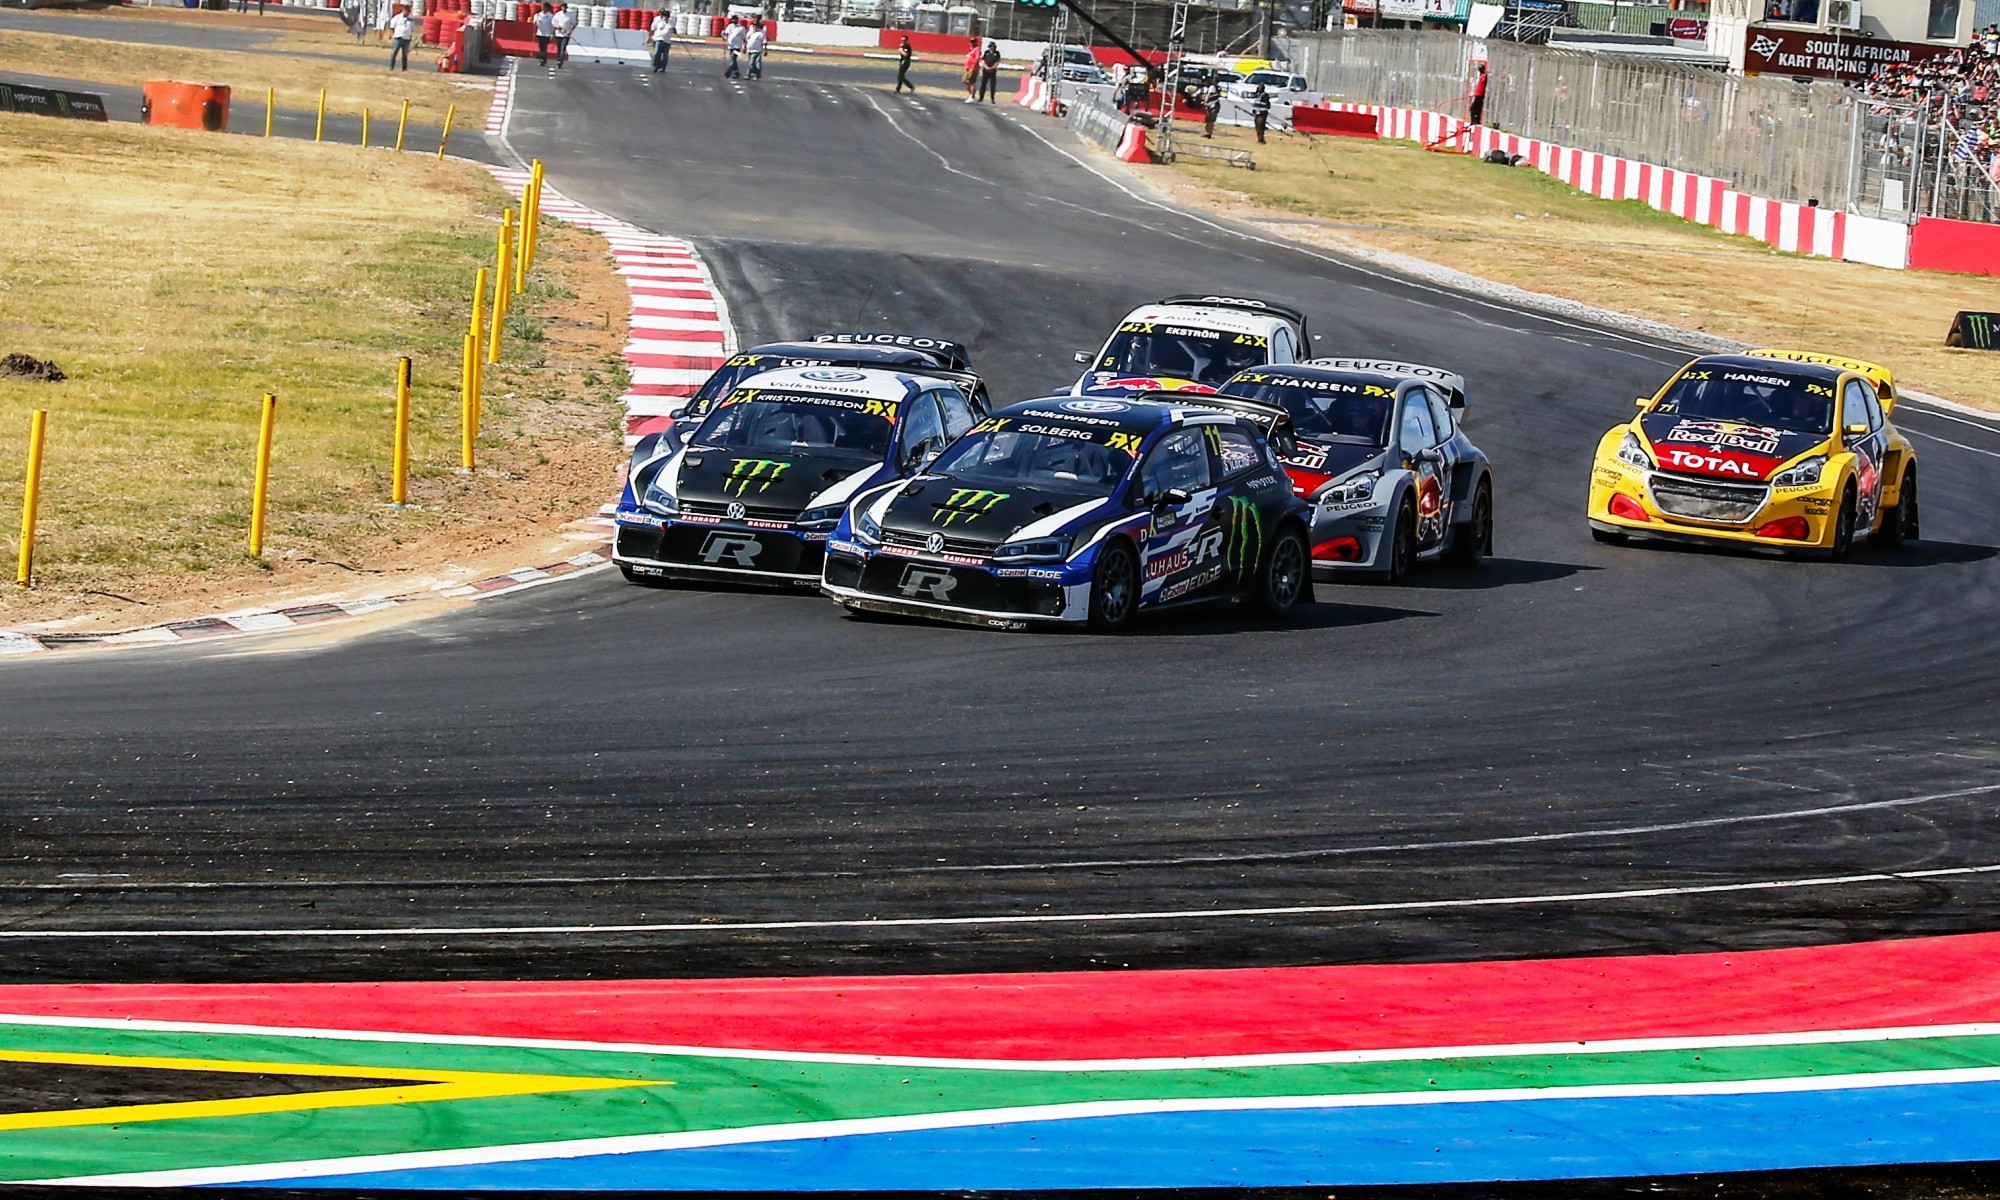 The final round of FIA World rallycross took place in SA